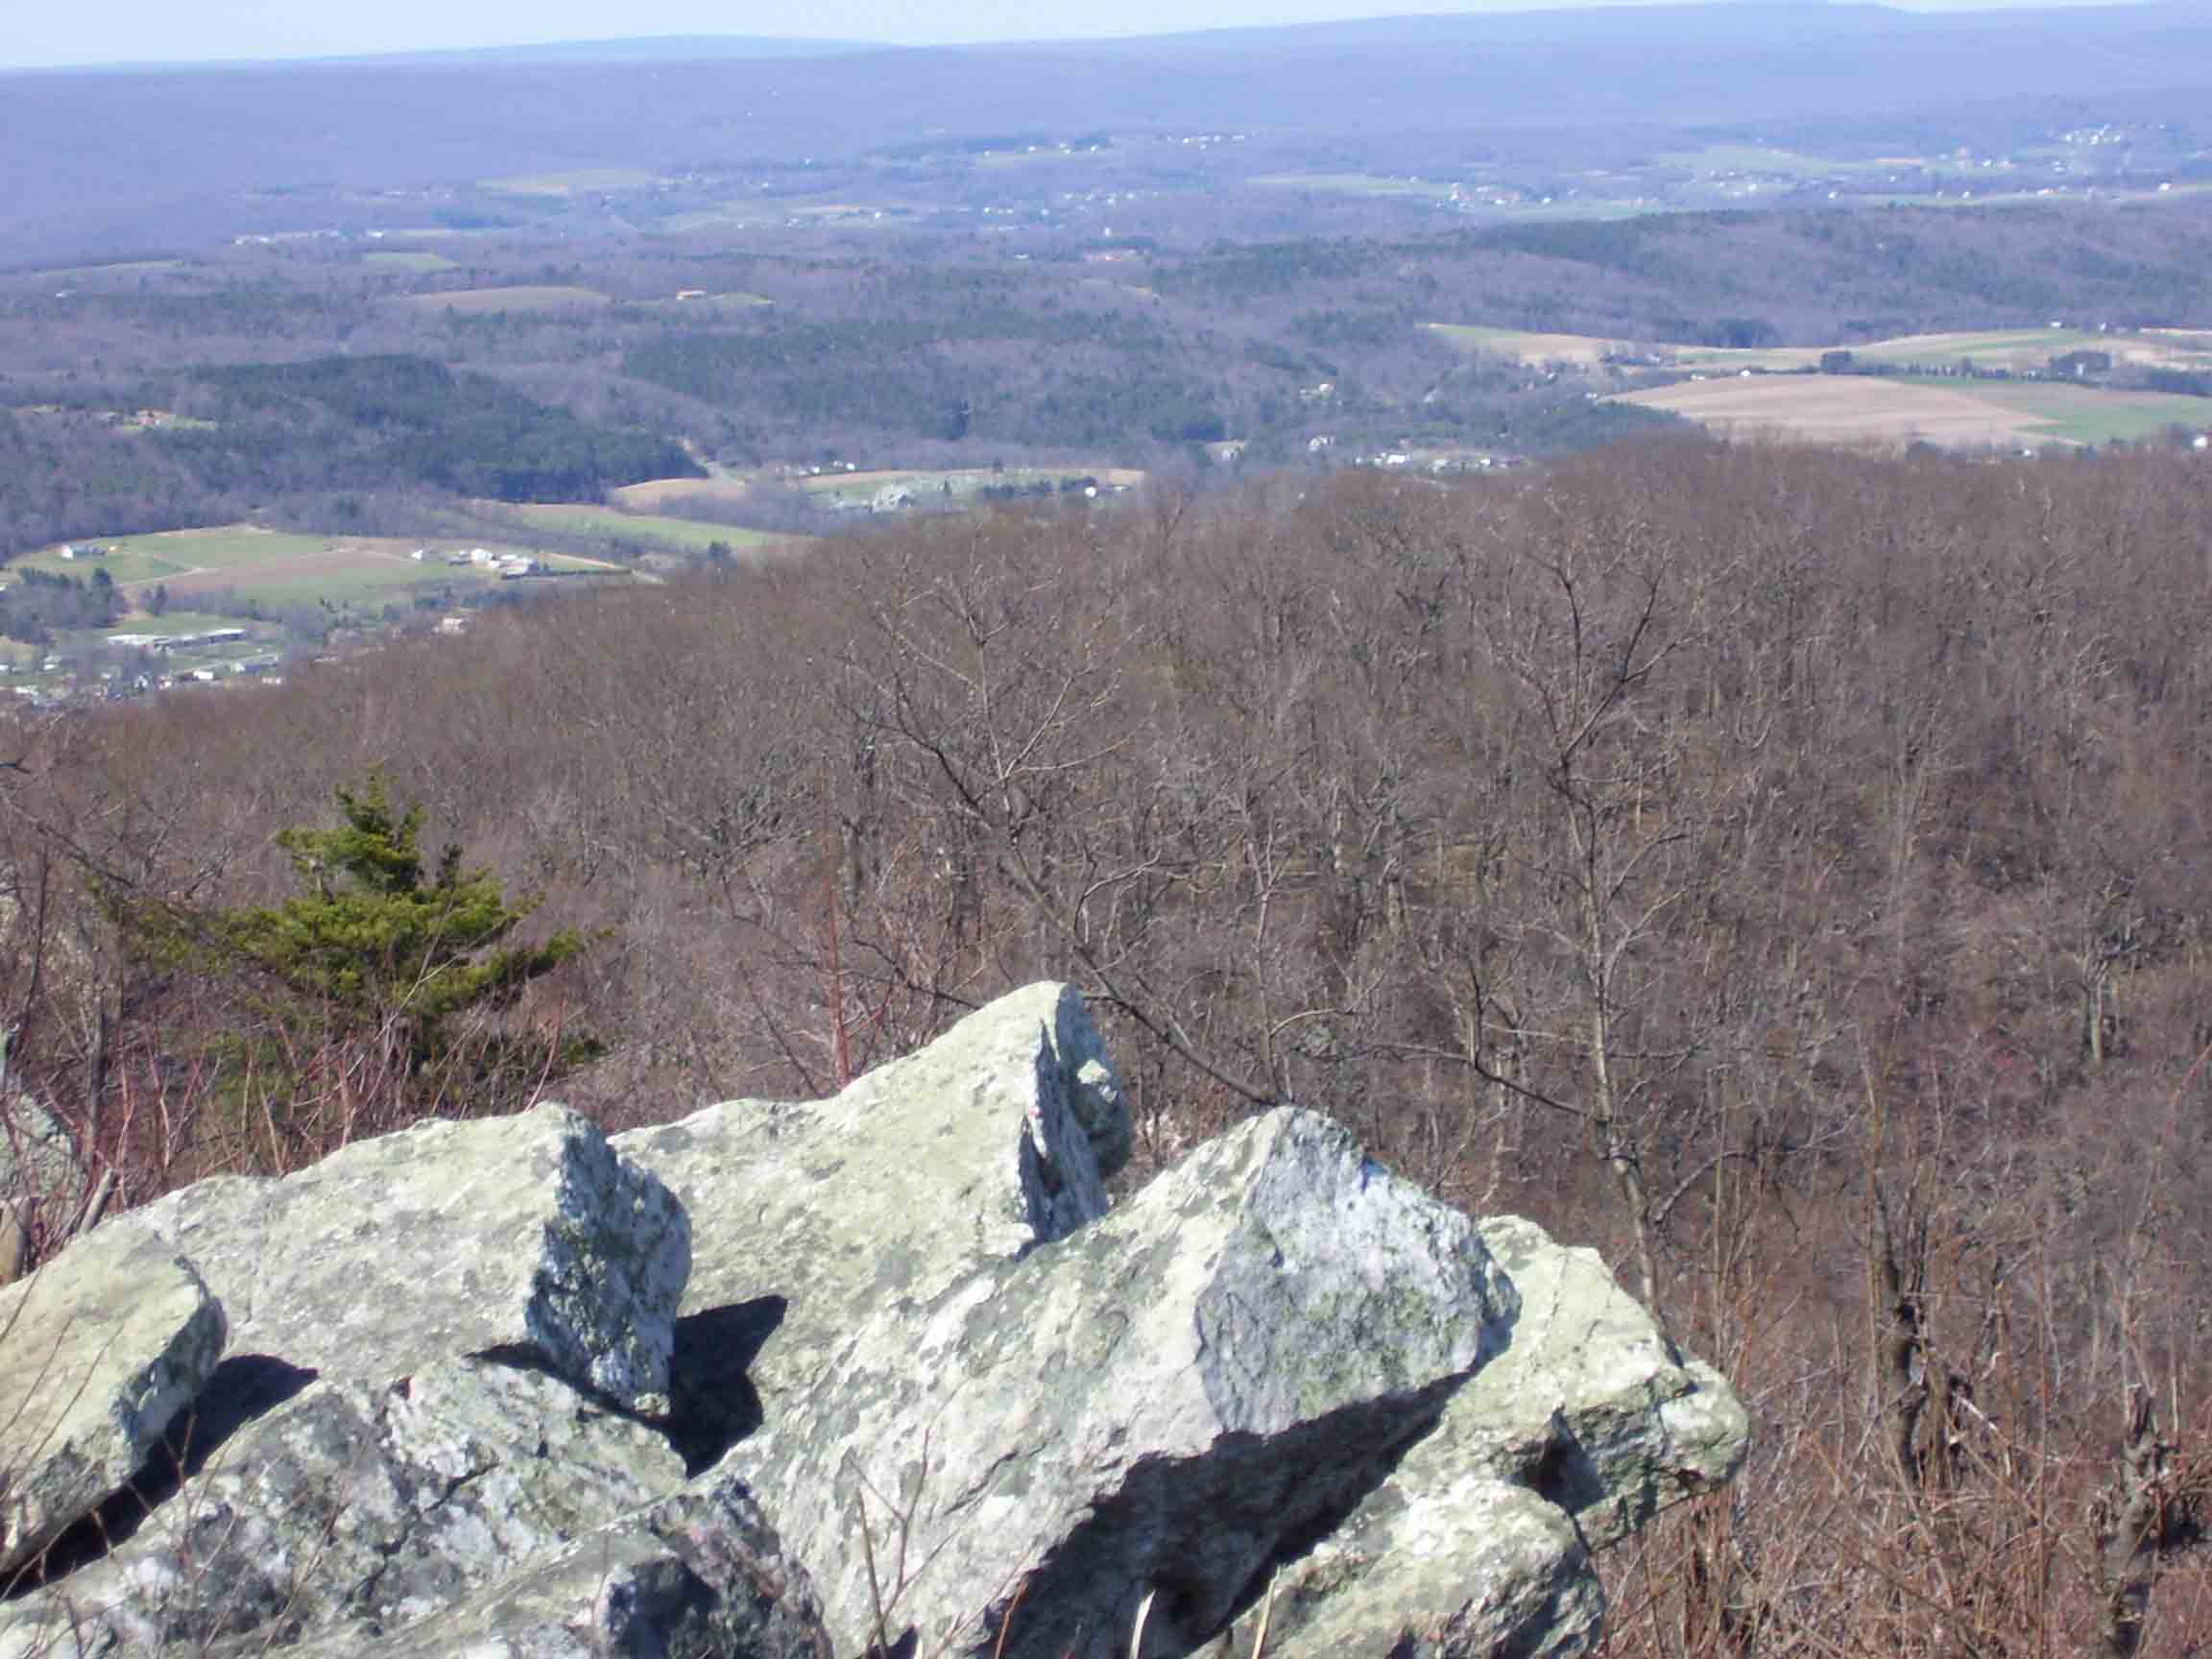 mm 8.0 - View to northeast from Bake Oven Knob.  Courtesy dlcul@conncoll.edu